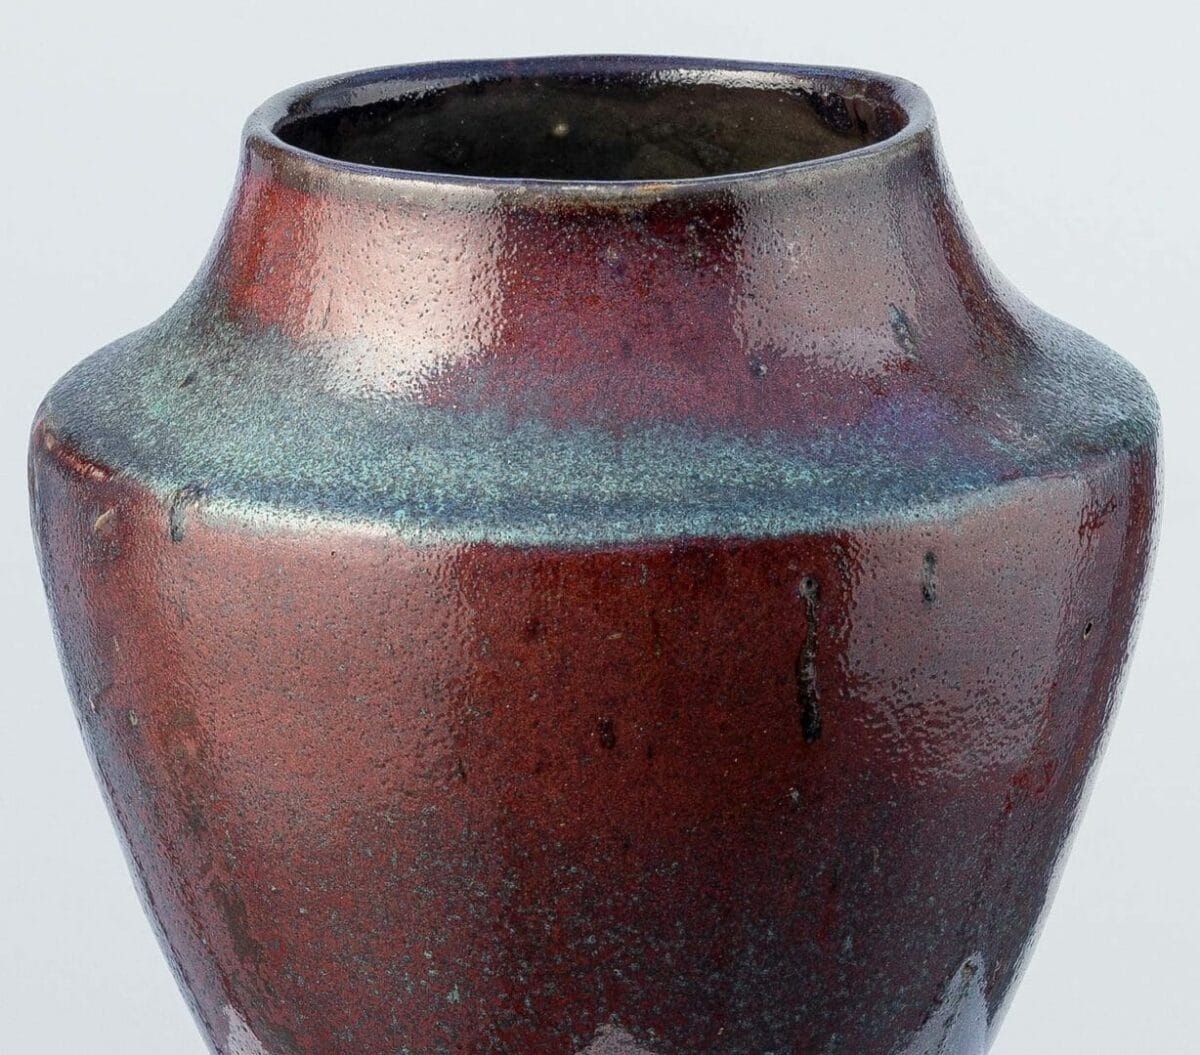 This red-glazed stoneware vase, created by Eugène Lion of the Carriès school, embodies Japonism and Wabi-Sabi, from Puisaye.